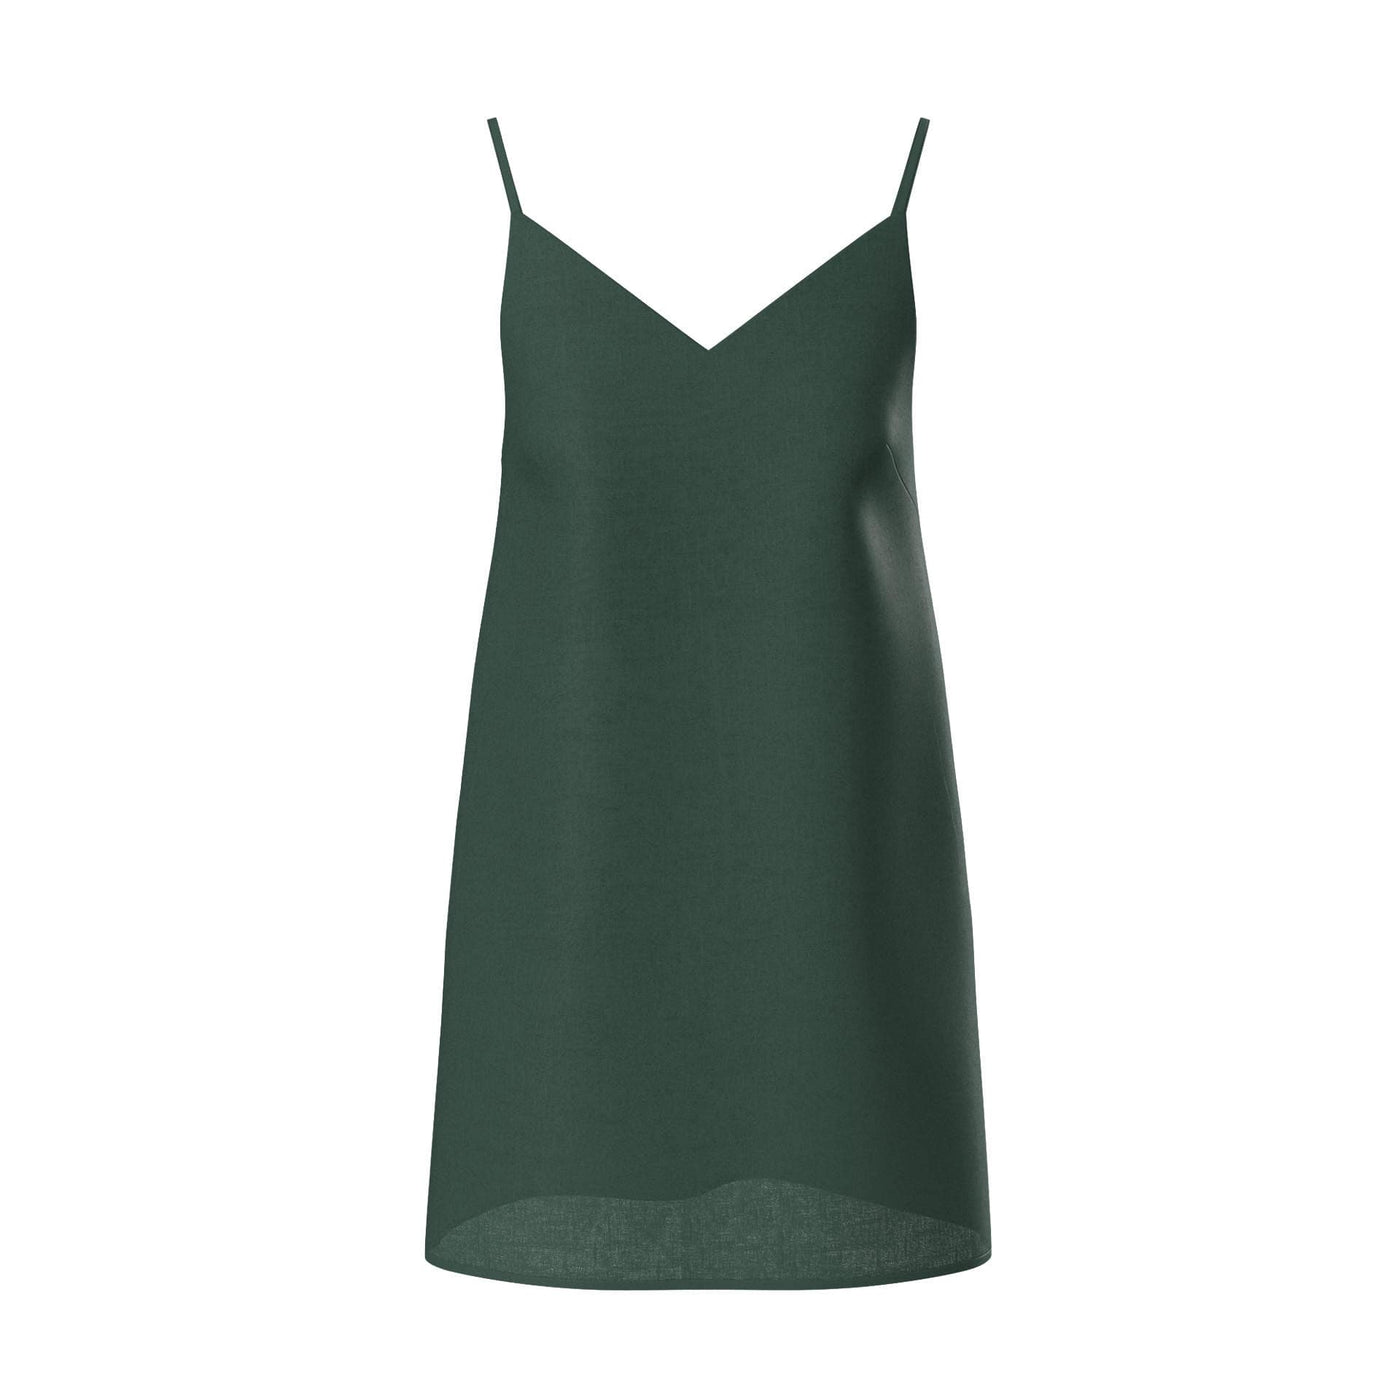 Lilly Pilly Collection 100% organic linen Liz slip dress in Bottle Green as 3D model showing front view